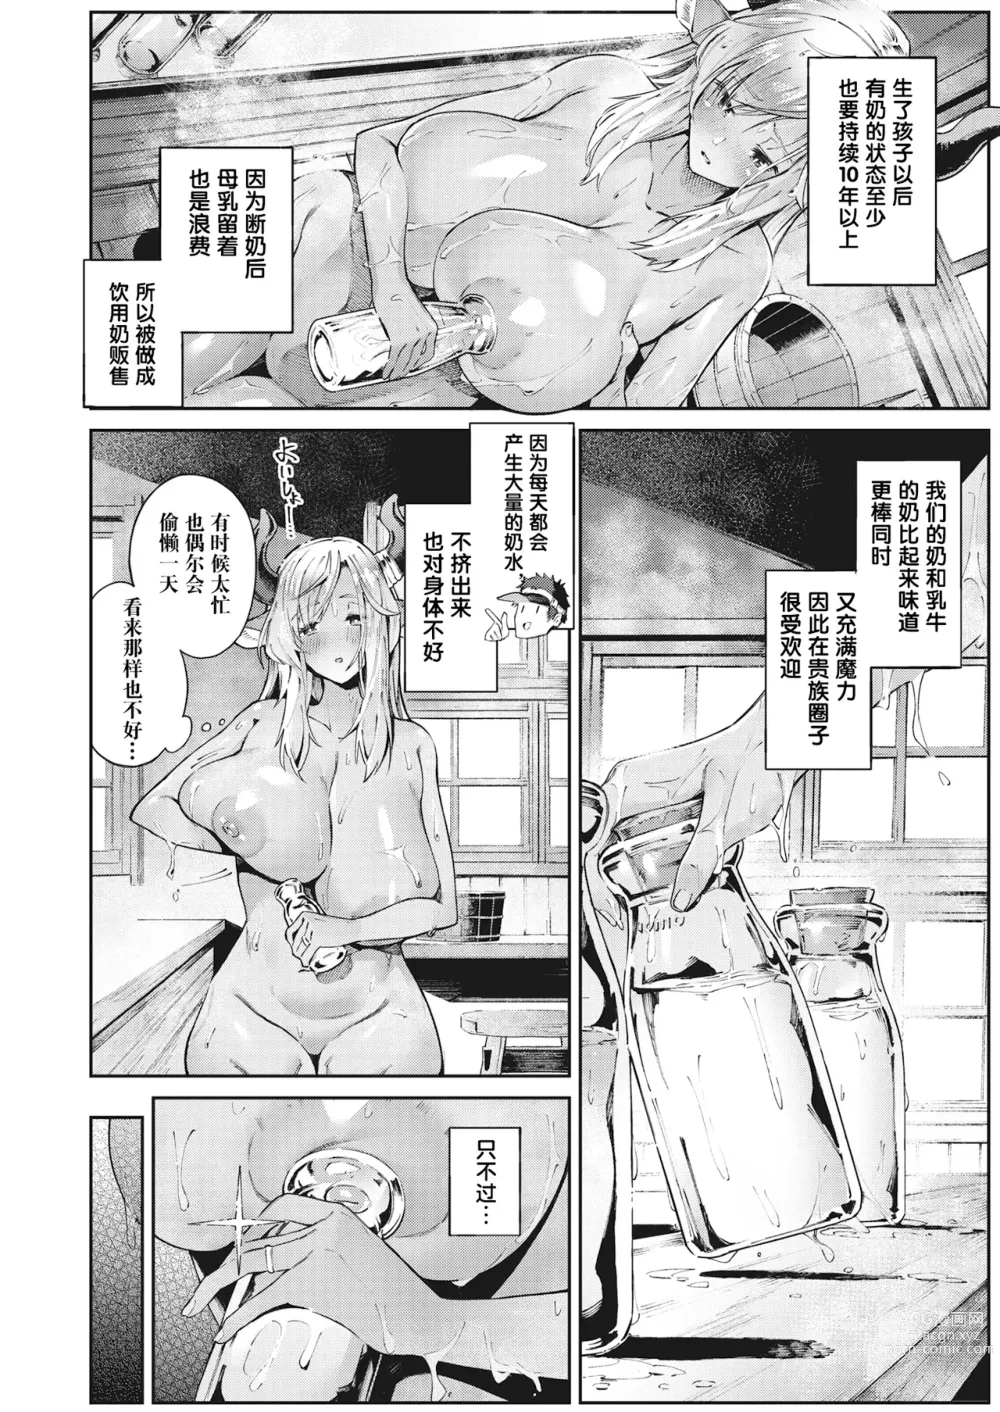 Page 4 of doujinshi Thick milk